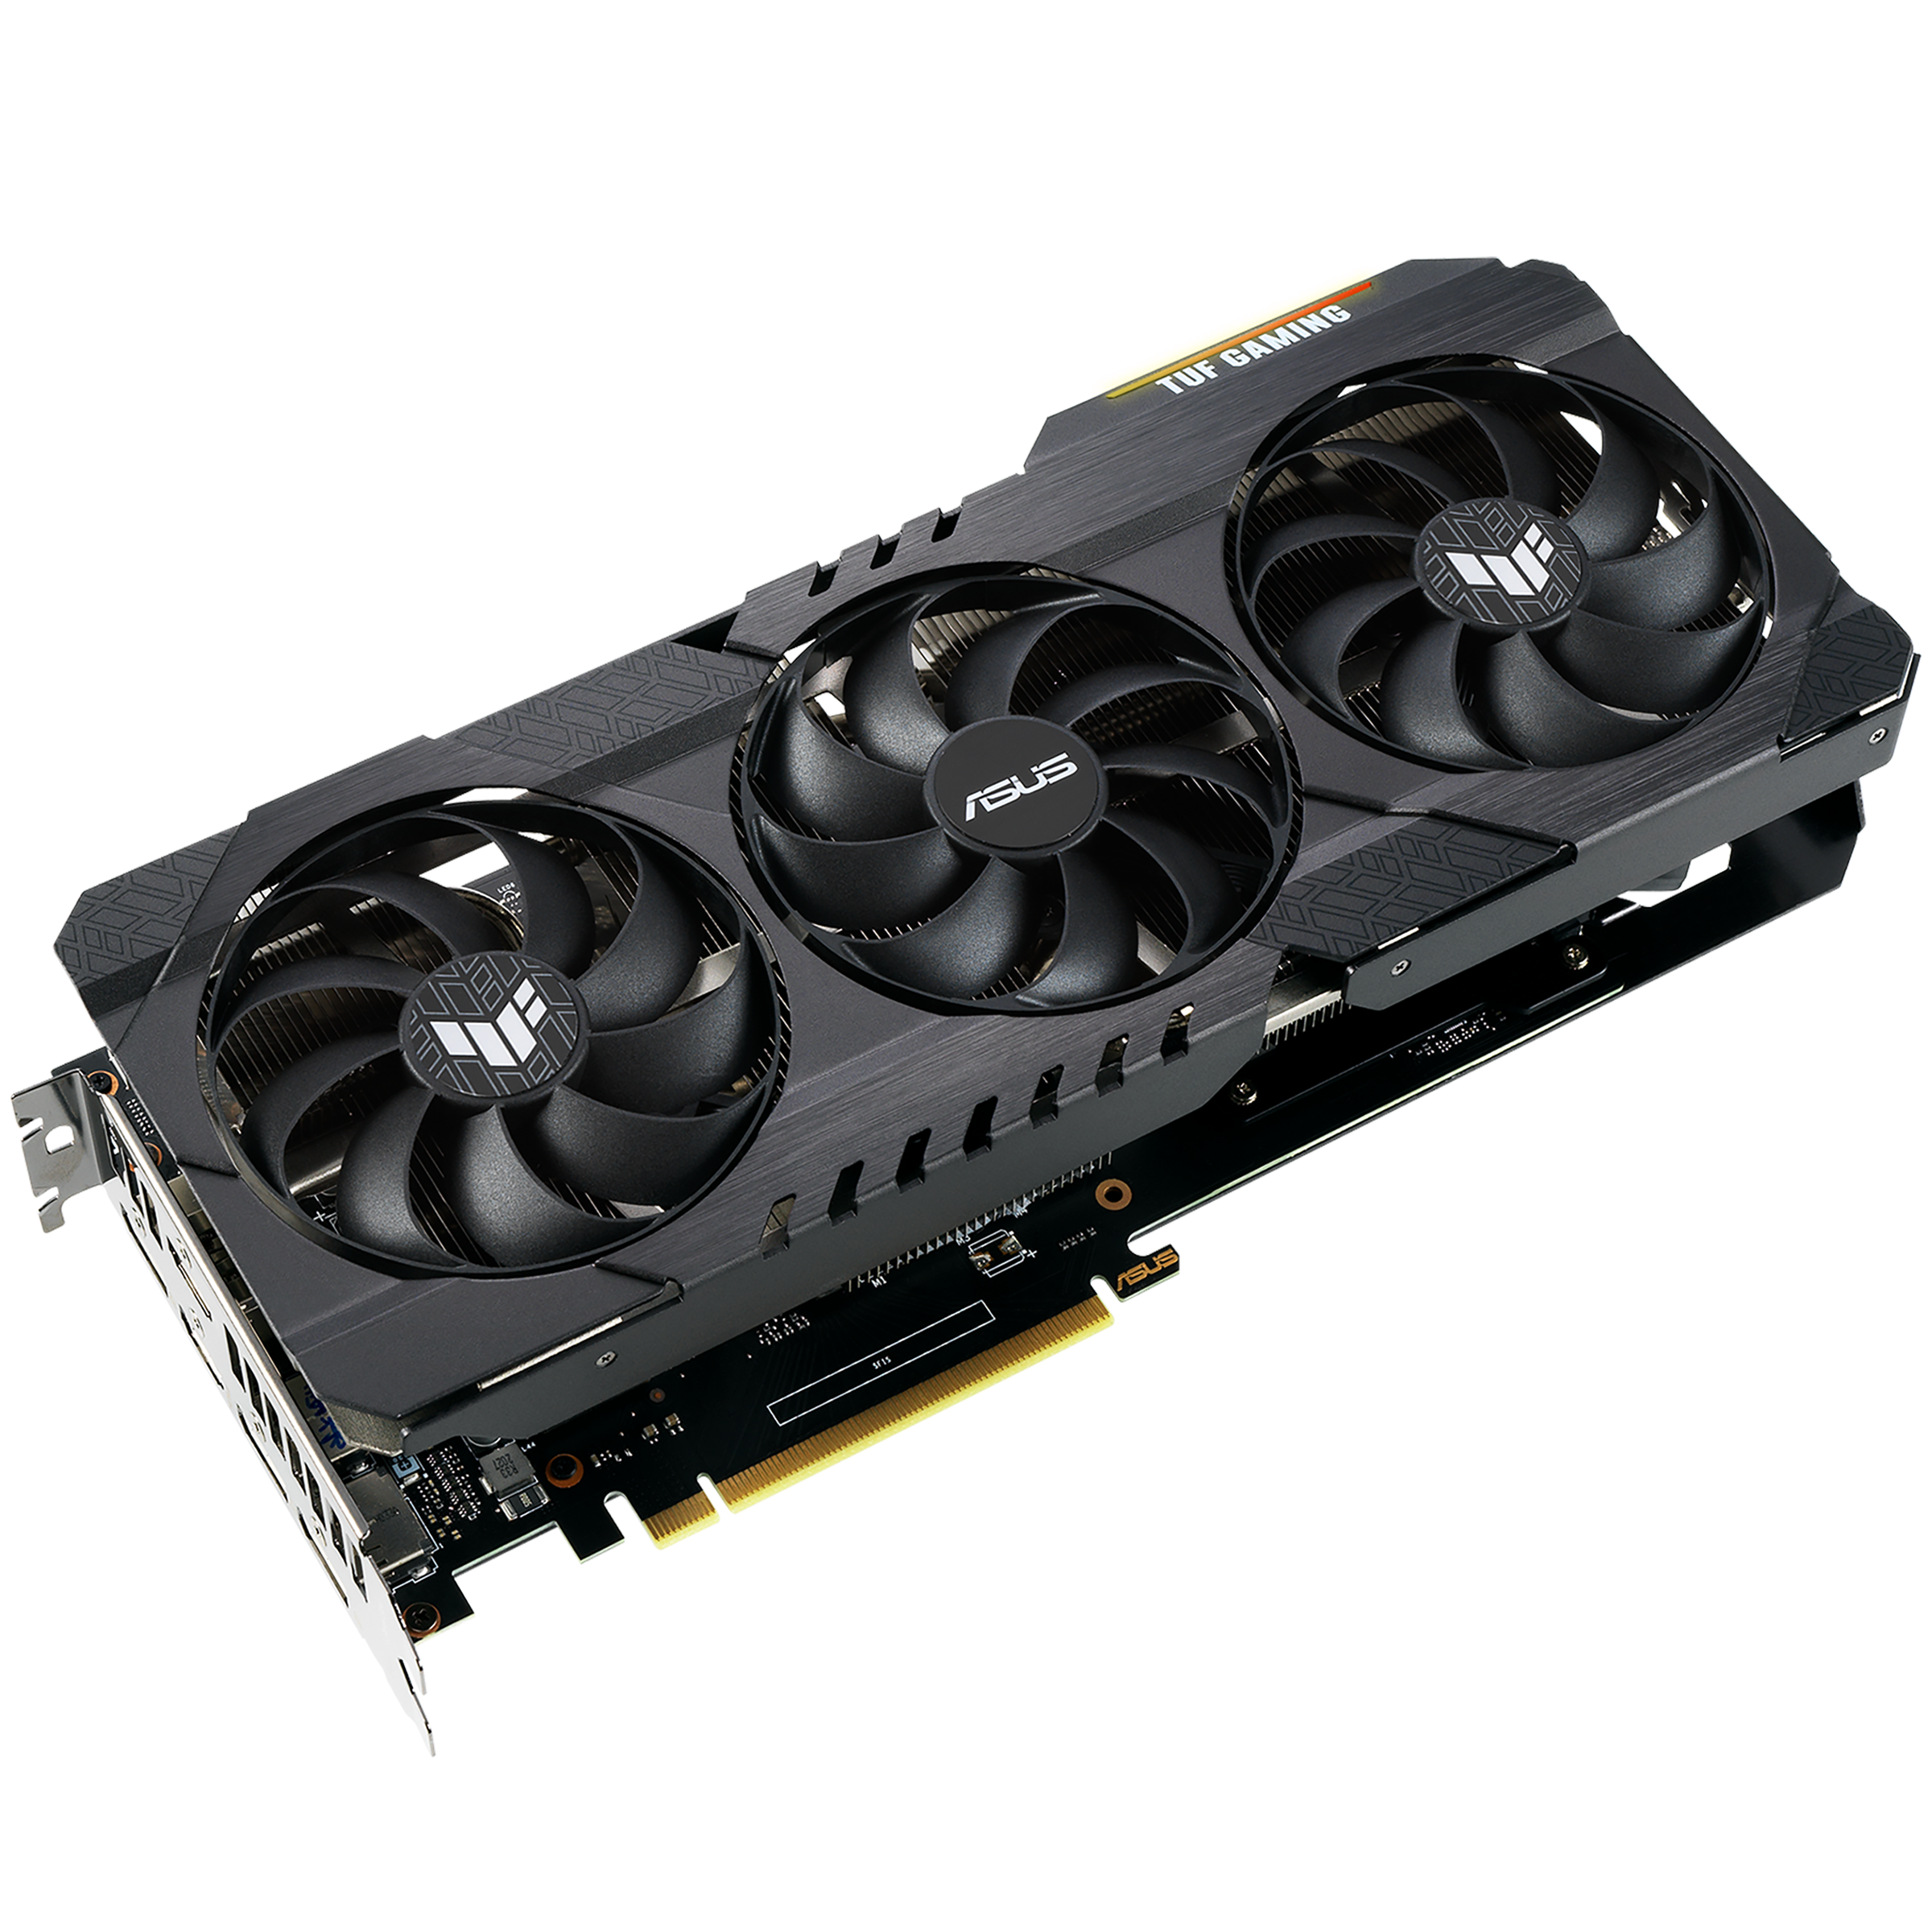 TUF-RTX3060-12G-V2-GAMING｜Graphics Cards｜ASUS Global